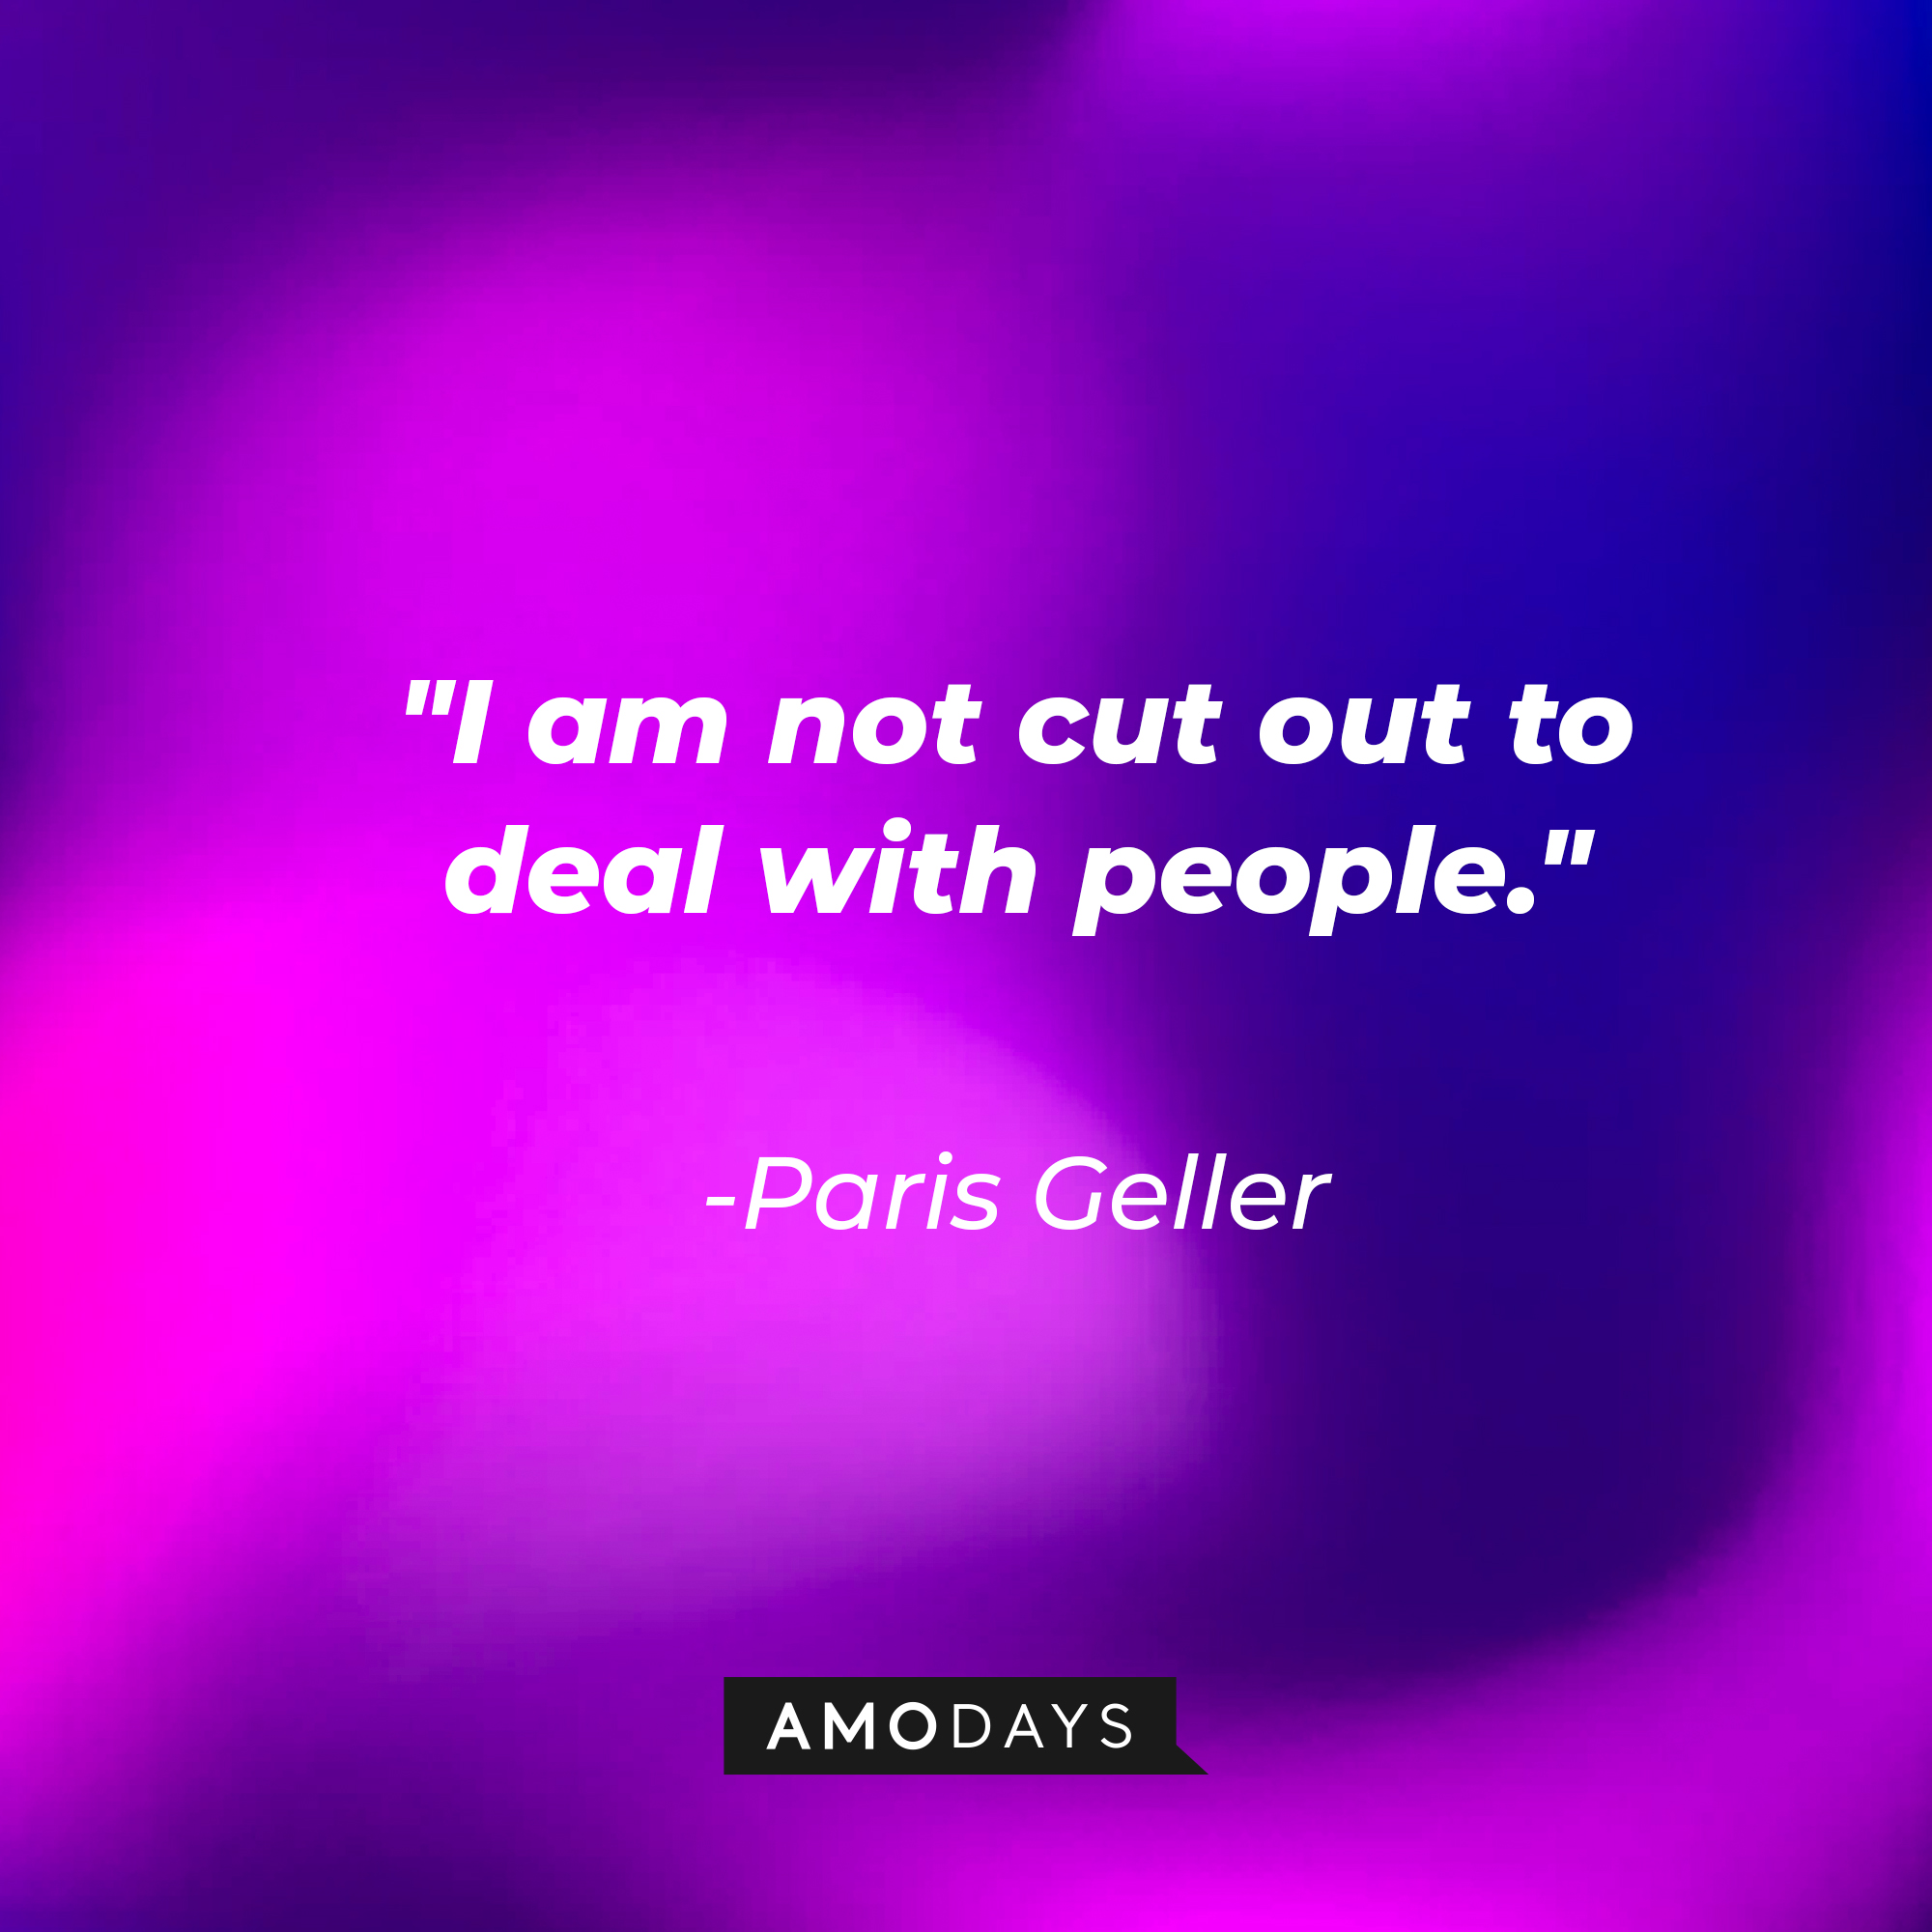 Paris Geller’s quote: “I am not cut out to deal with people.” | Source: AmoDays